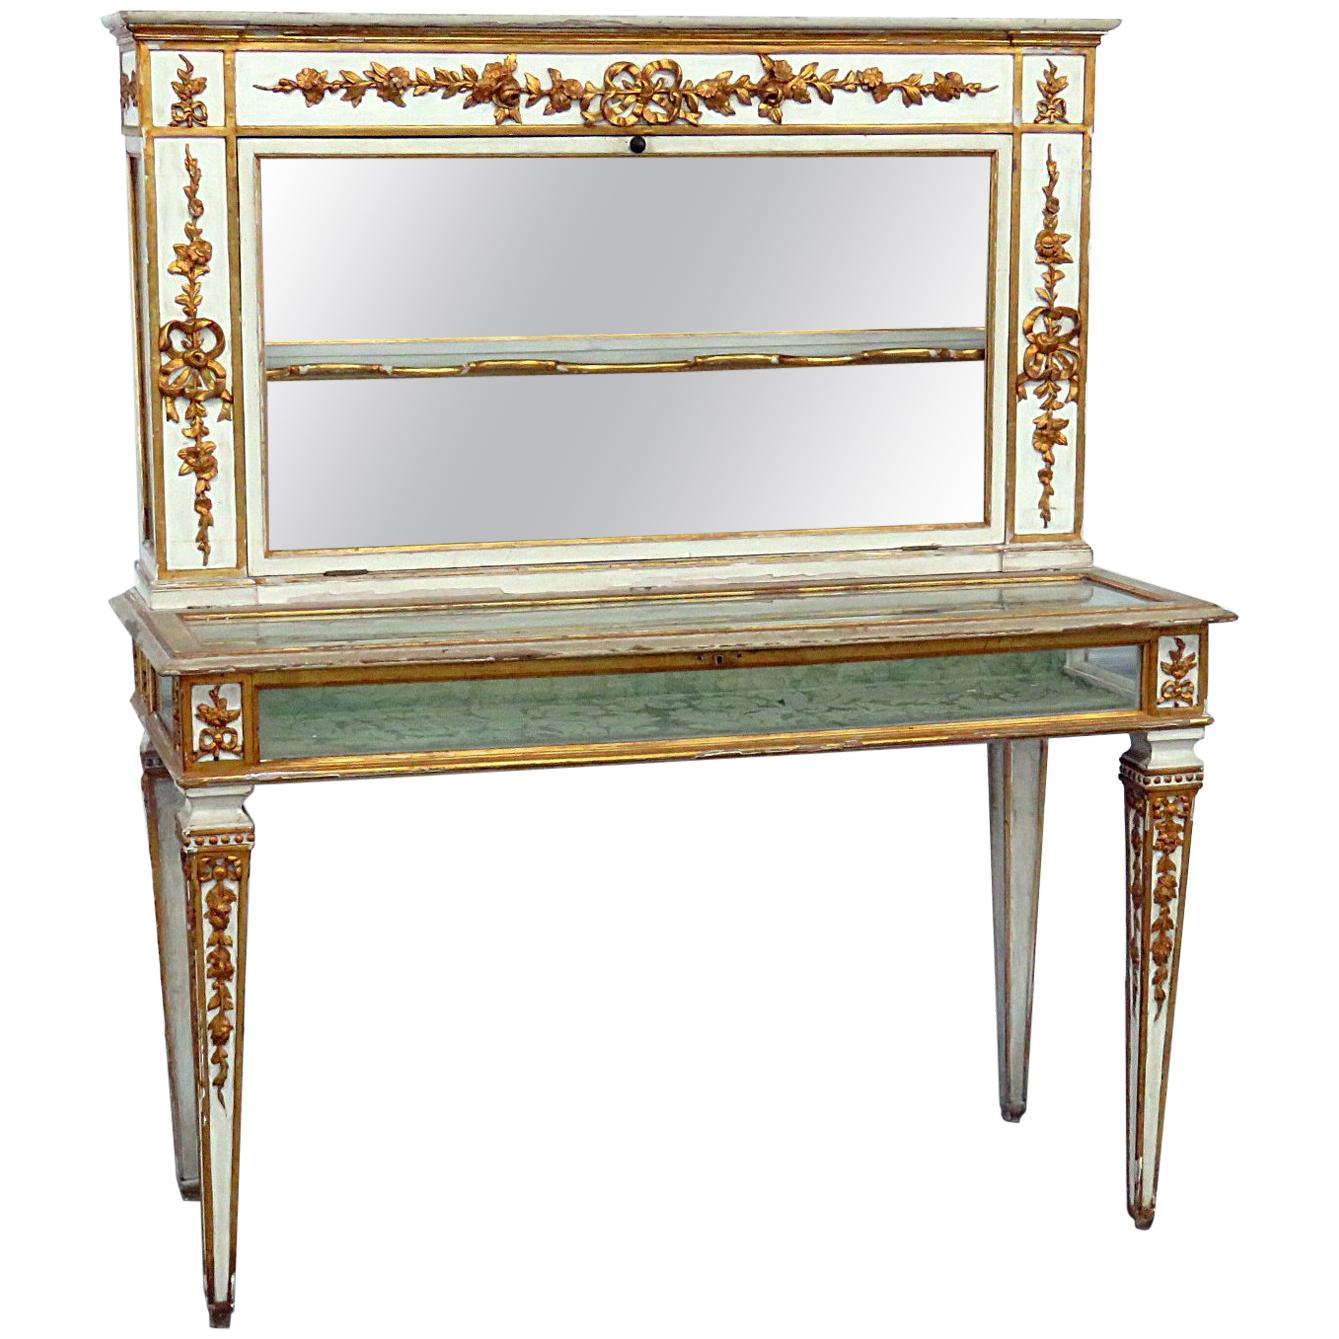 Antique Painted and Gilded Italian Venetian Gilded Jewelry Display Case C1880s